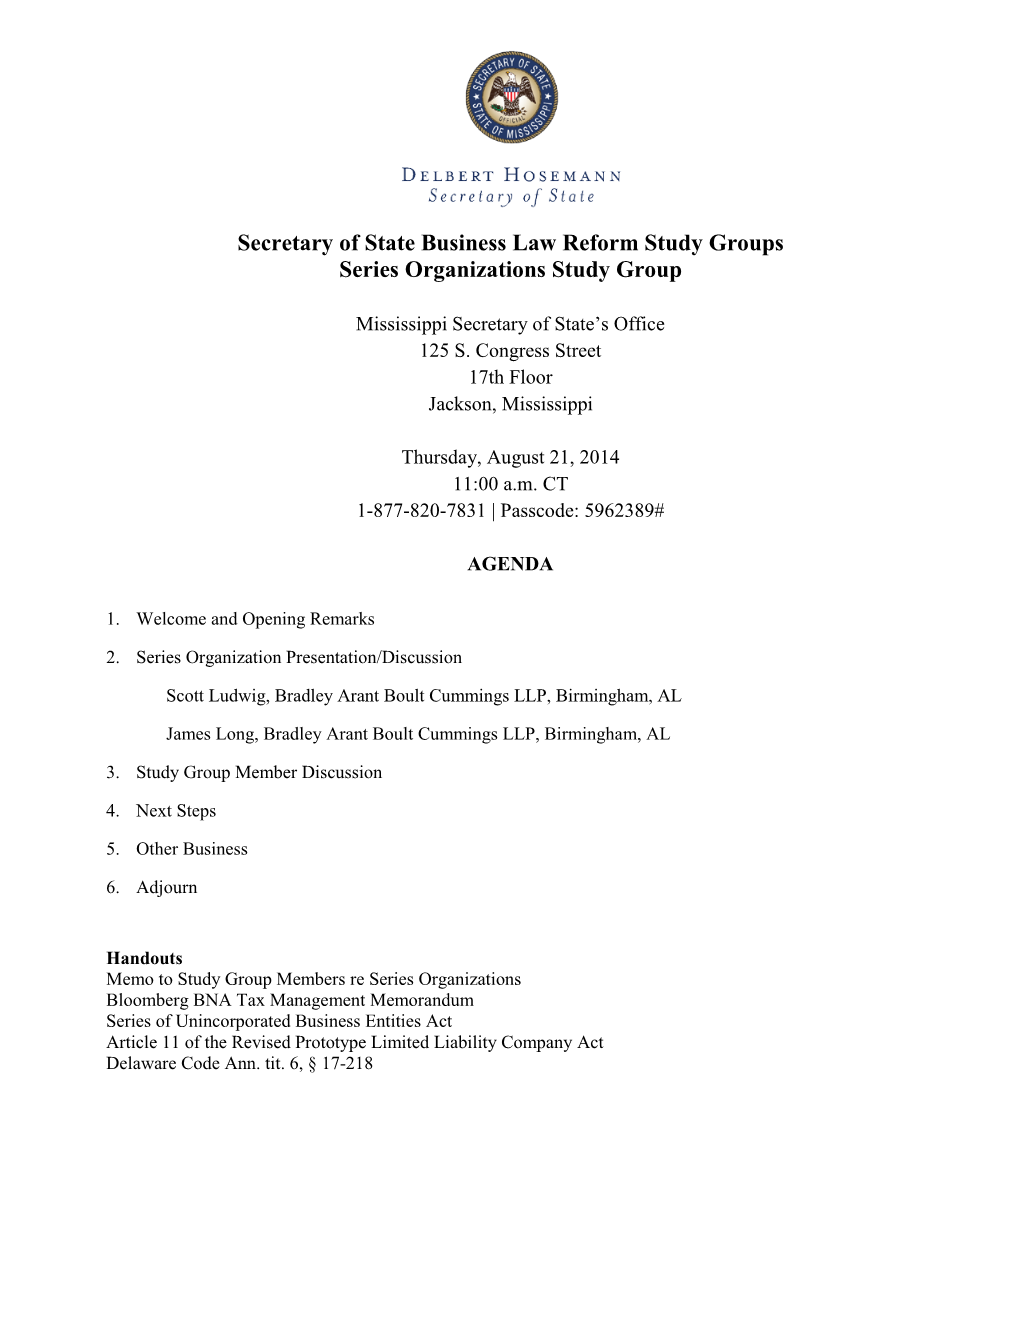 Secretary of State Business Law Reform Study Groups Series Organizations Study Group